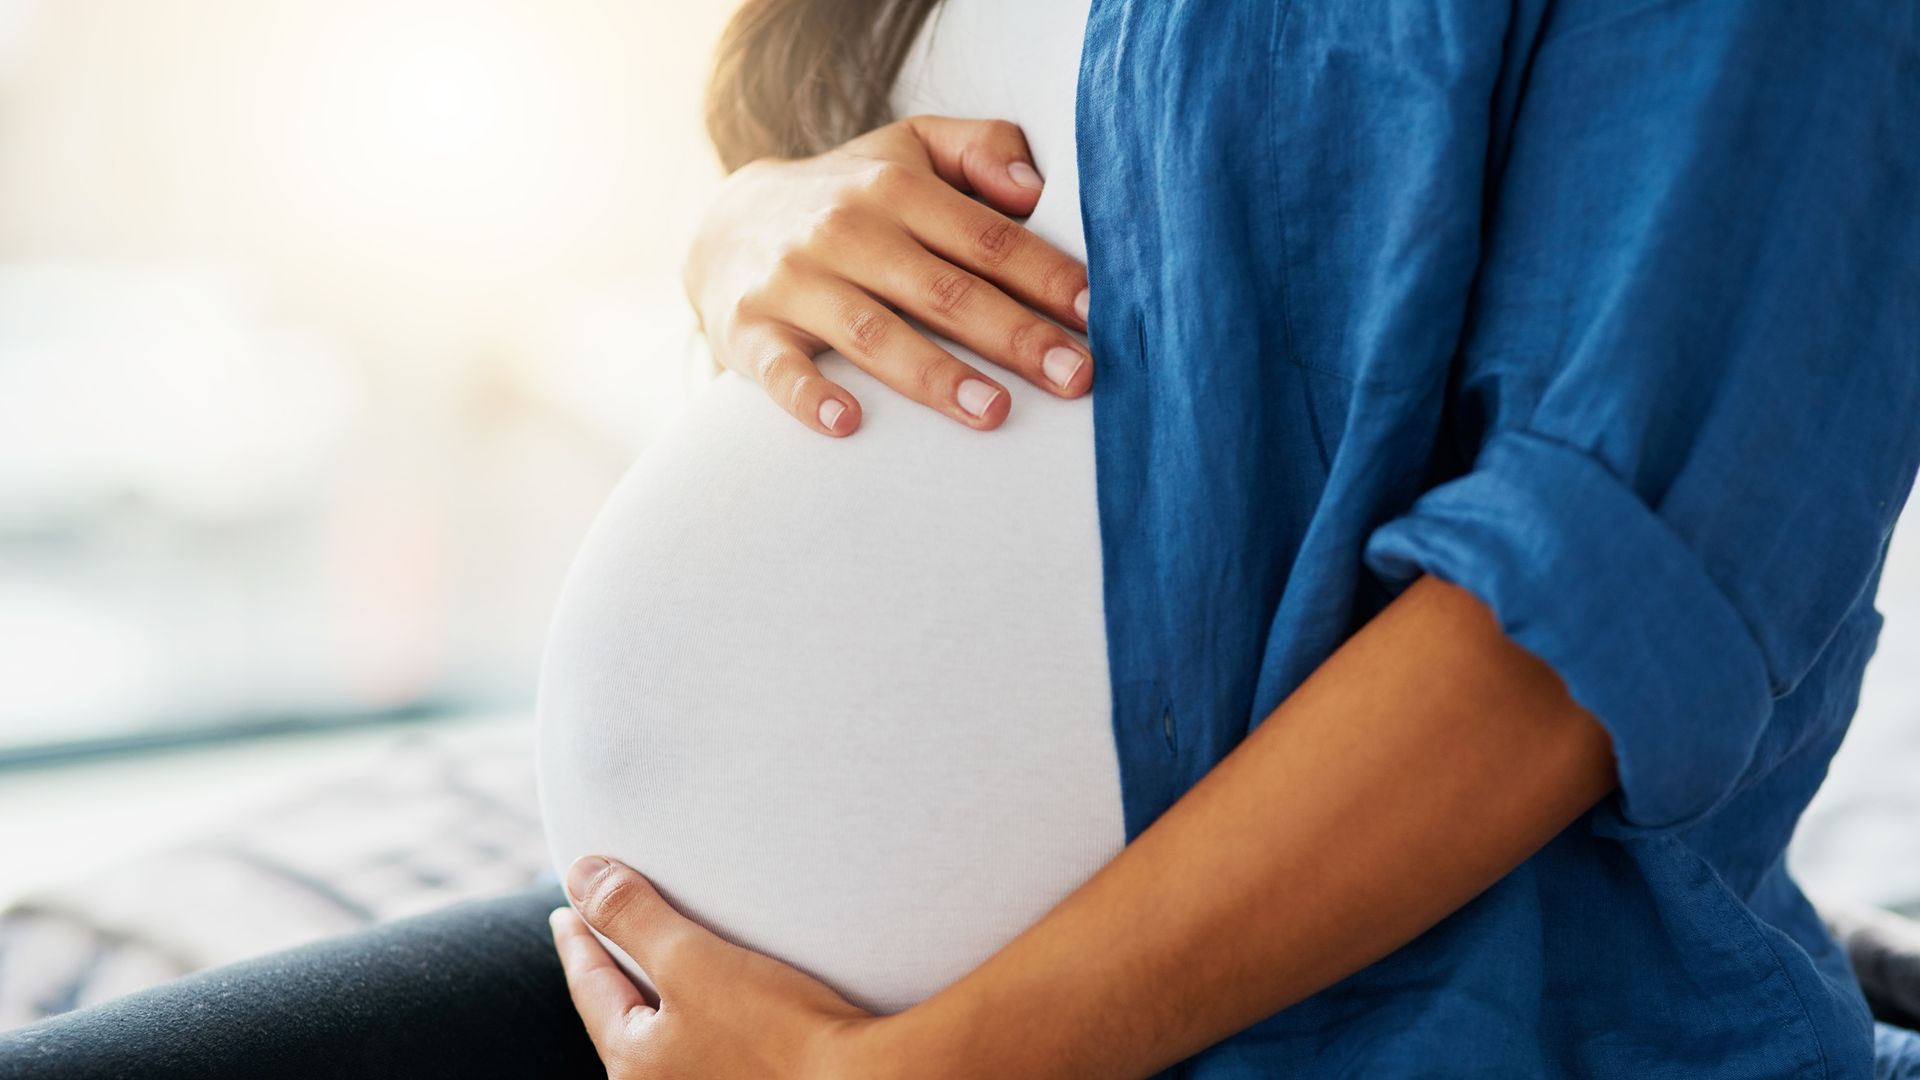 Good maternity care 'exception rather than the rule' - report